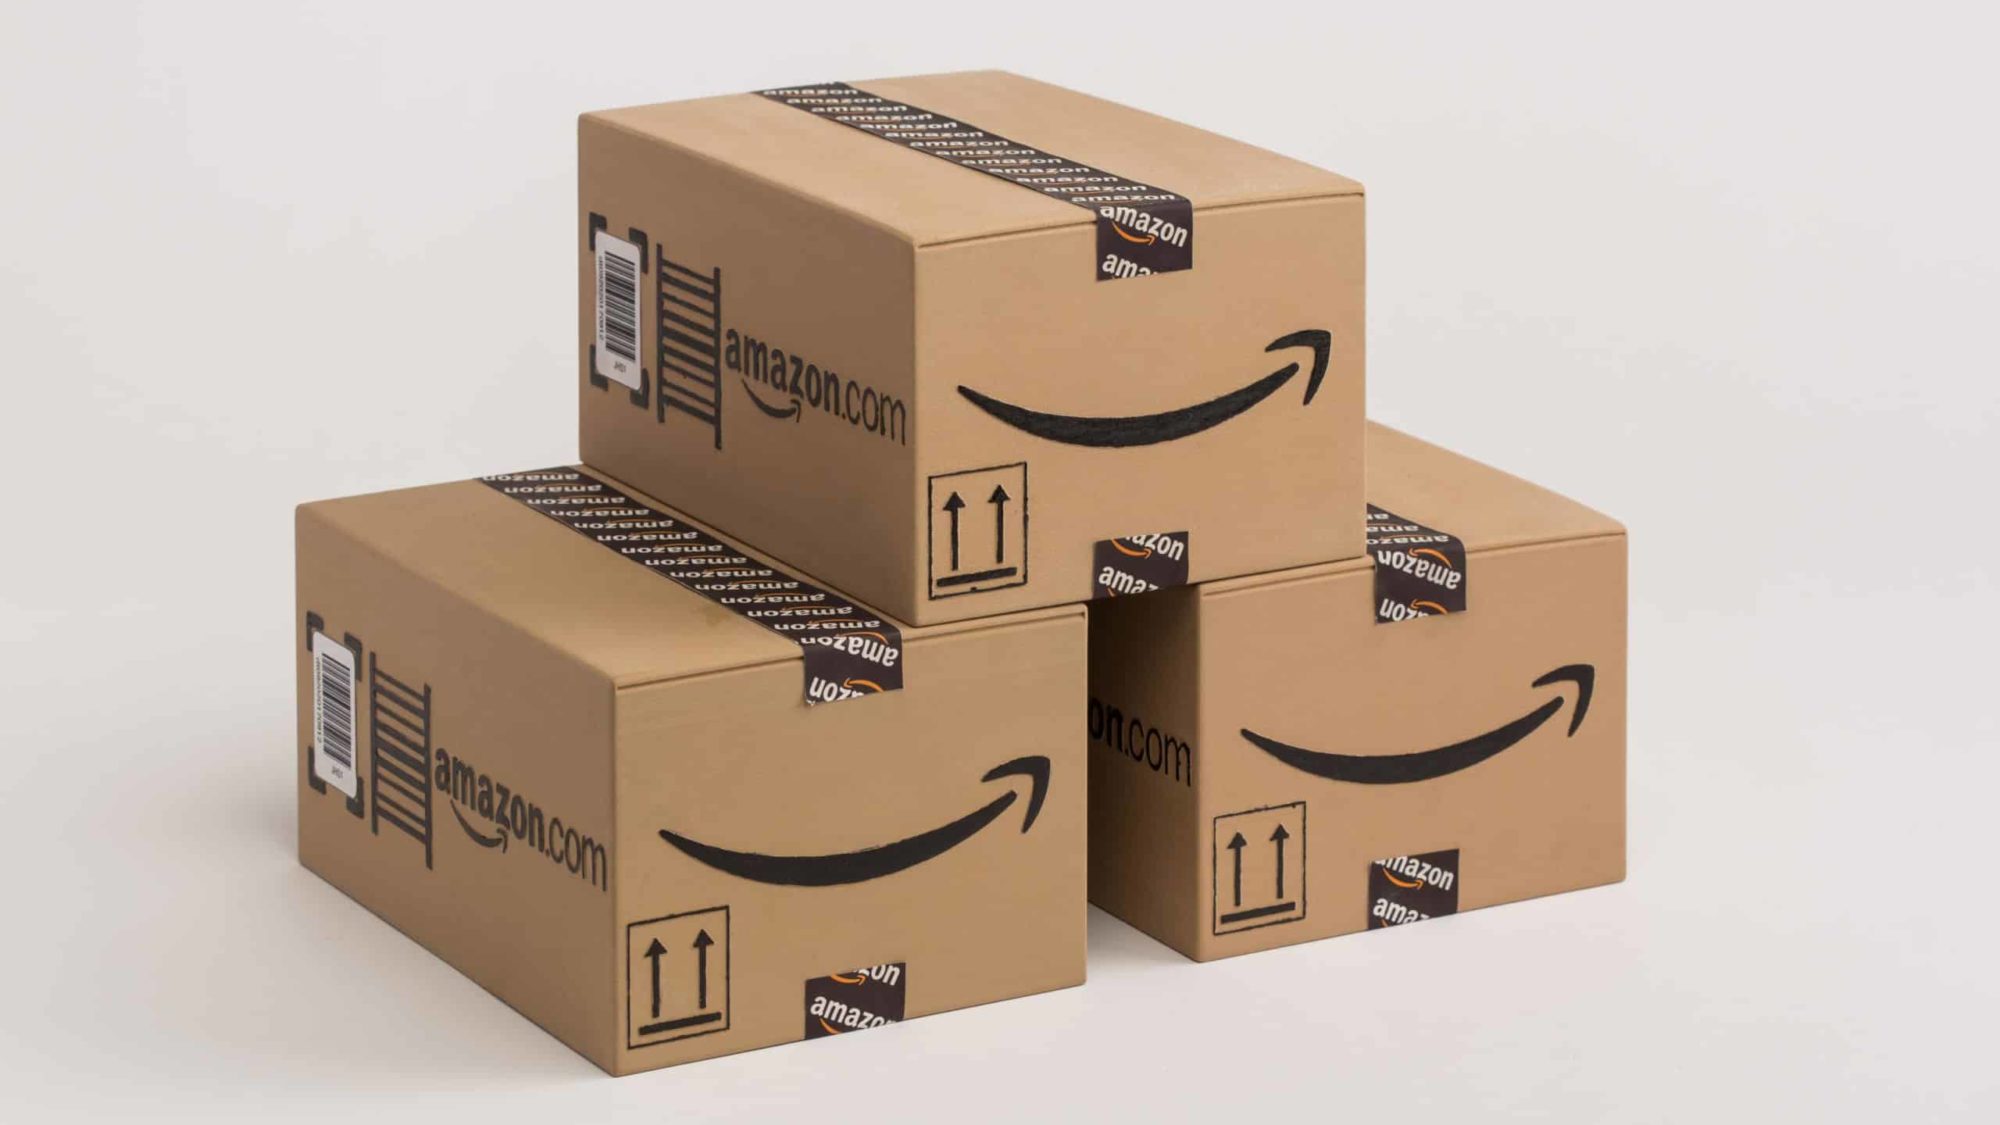 Amazon to hire over 5000 more UK staff